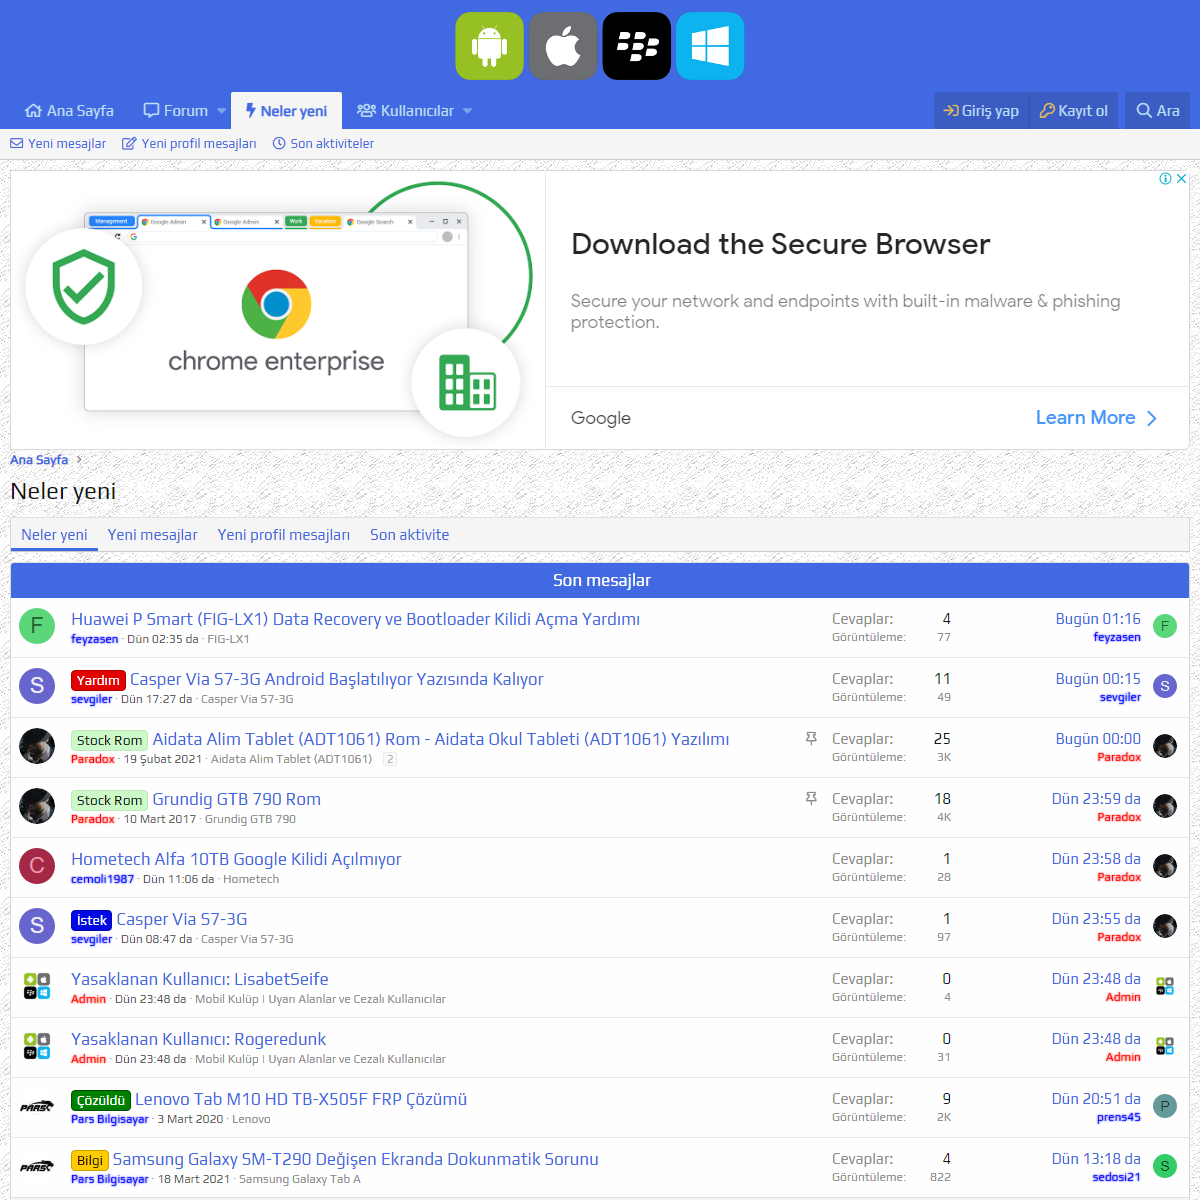 A complete backup of https://www.mobilkulup.com/whats-new/